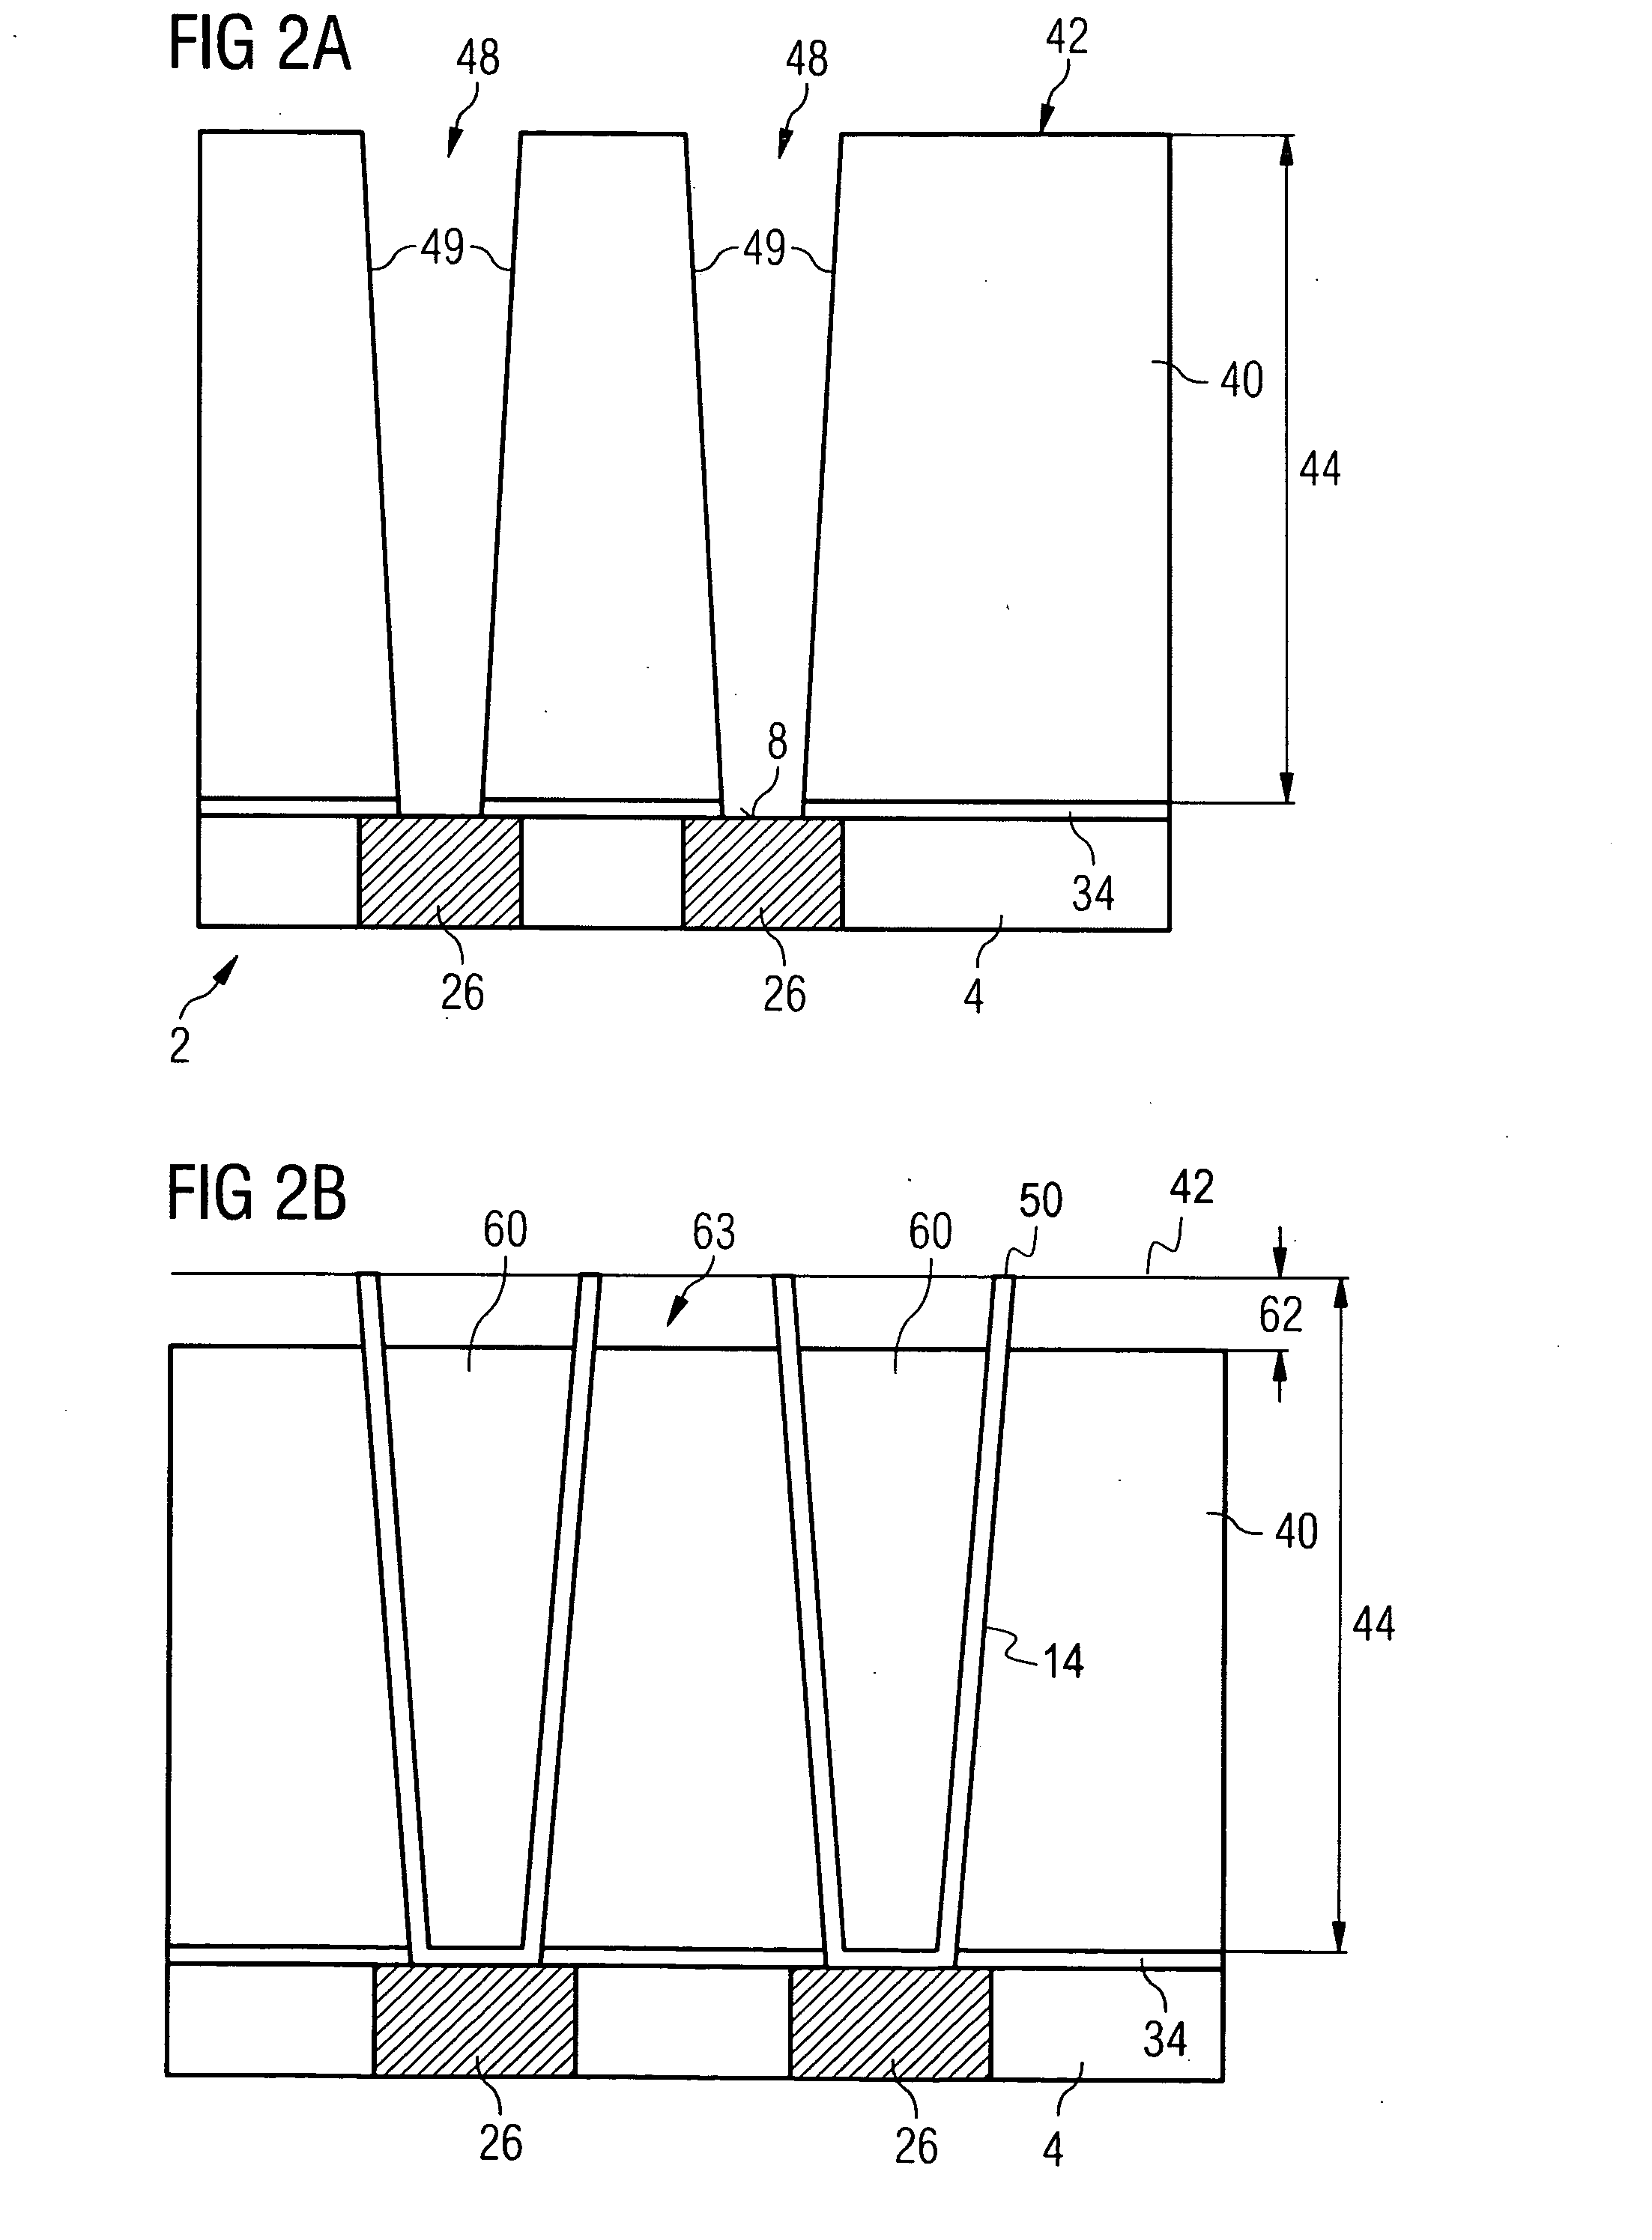 Stacked capacitor and method for producing stacked capacitors for dynamic memory cells